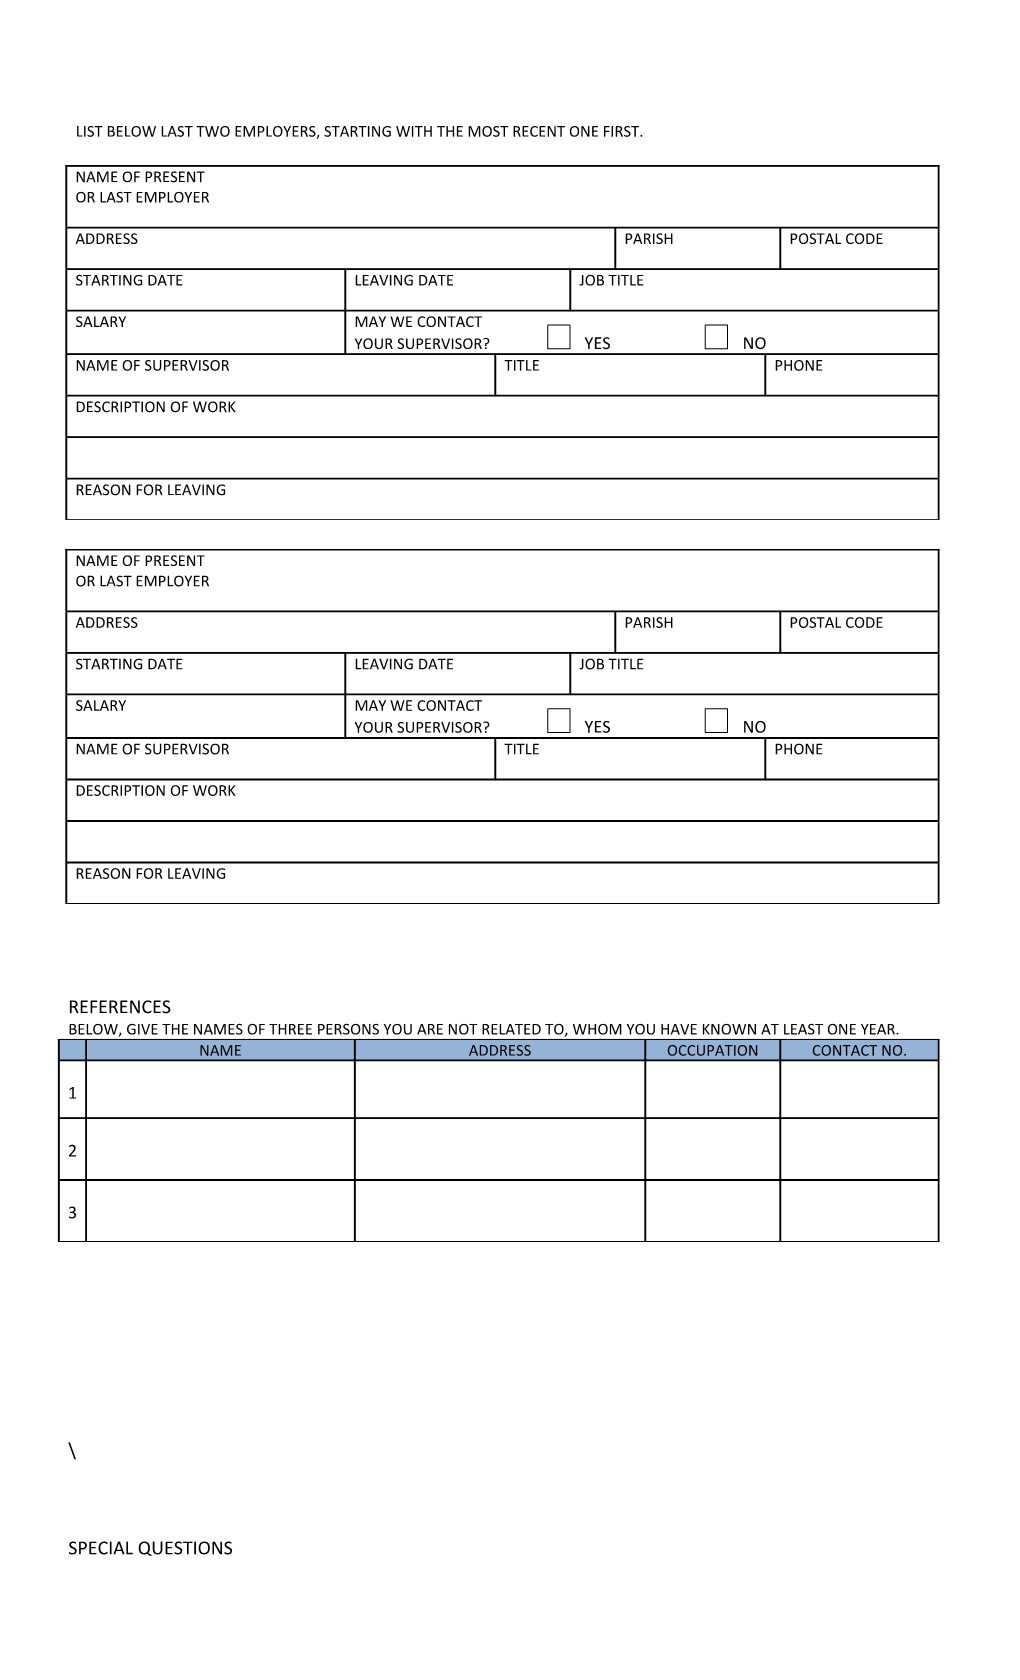 Application for Employment Pre-Employment